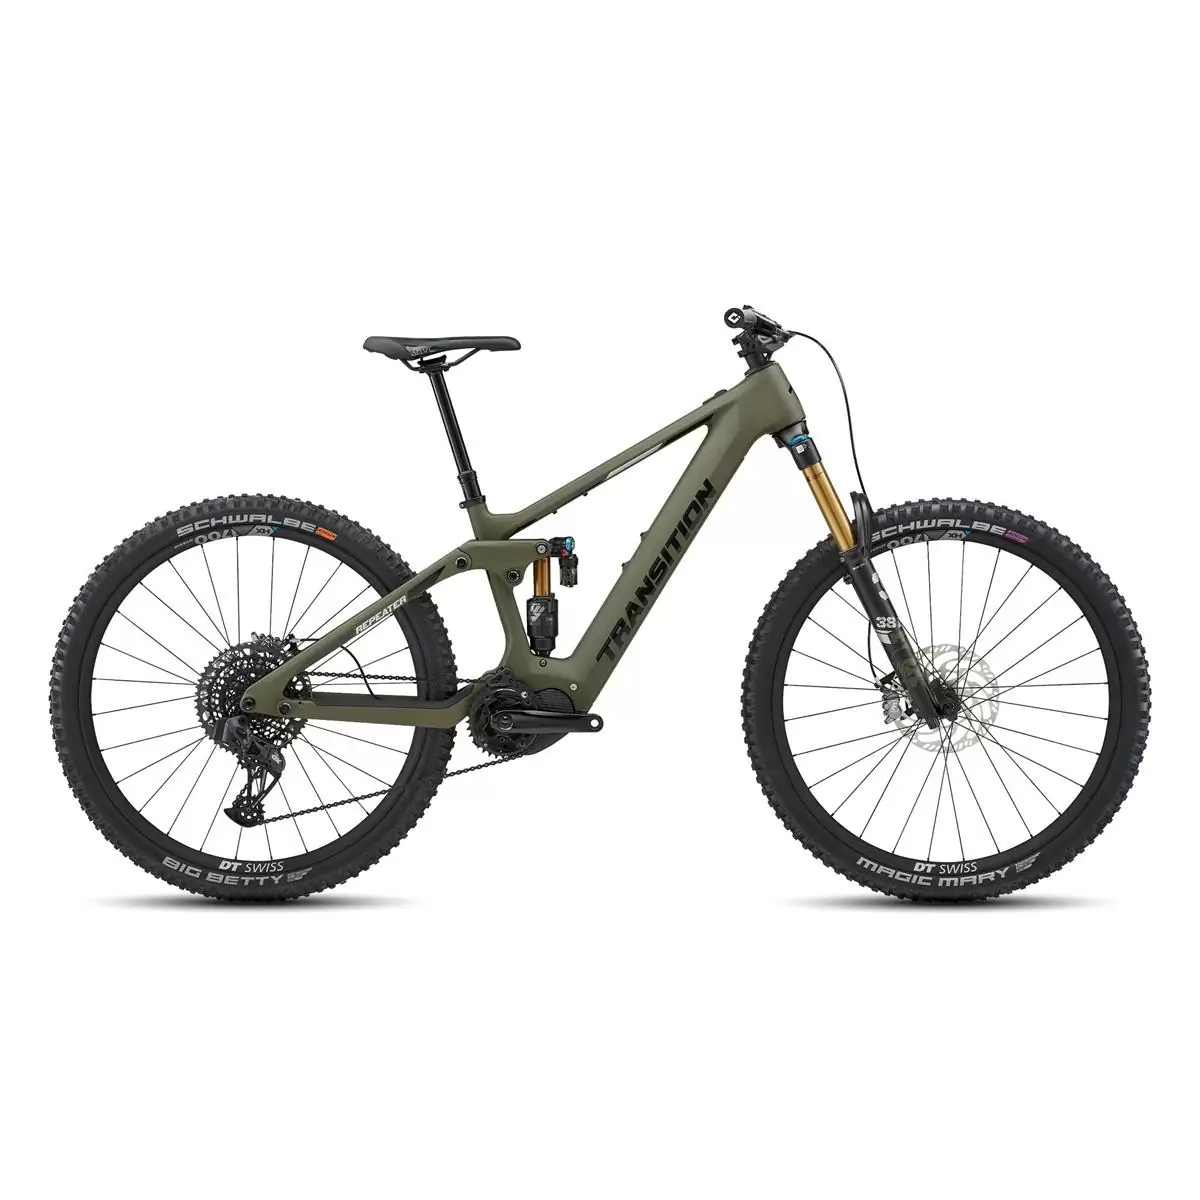 Repeater Carbon AXS 29'' 160mm 12v 630Wh Shimano EP8 Mossy Green 2022 Taglia S - image